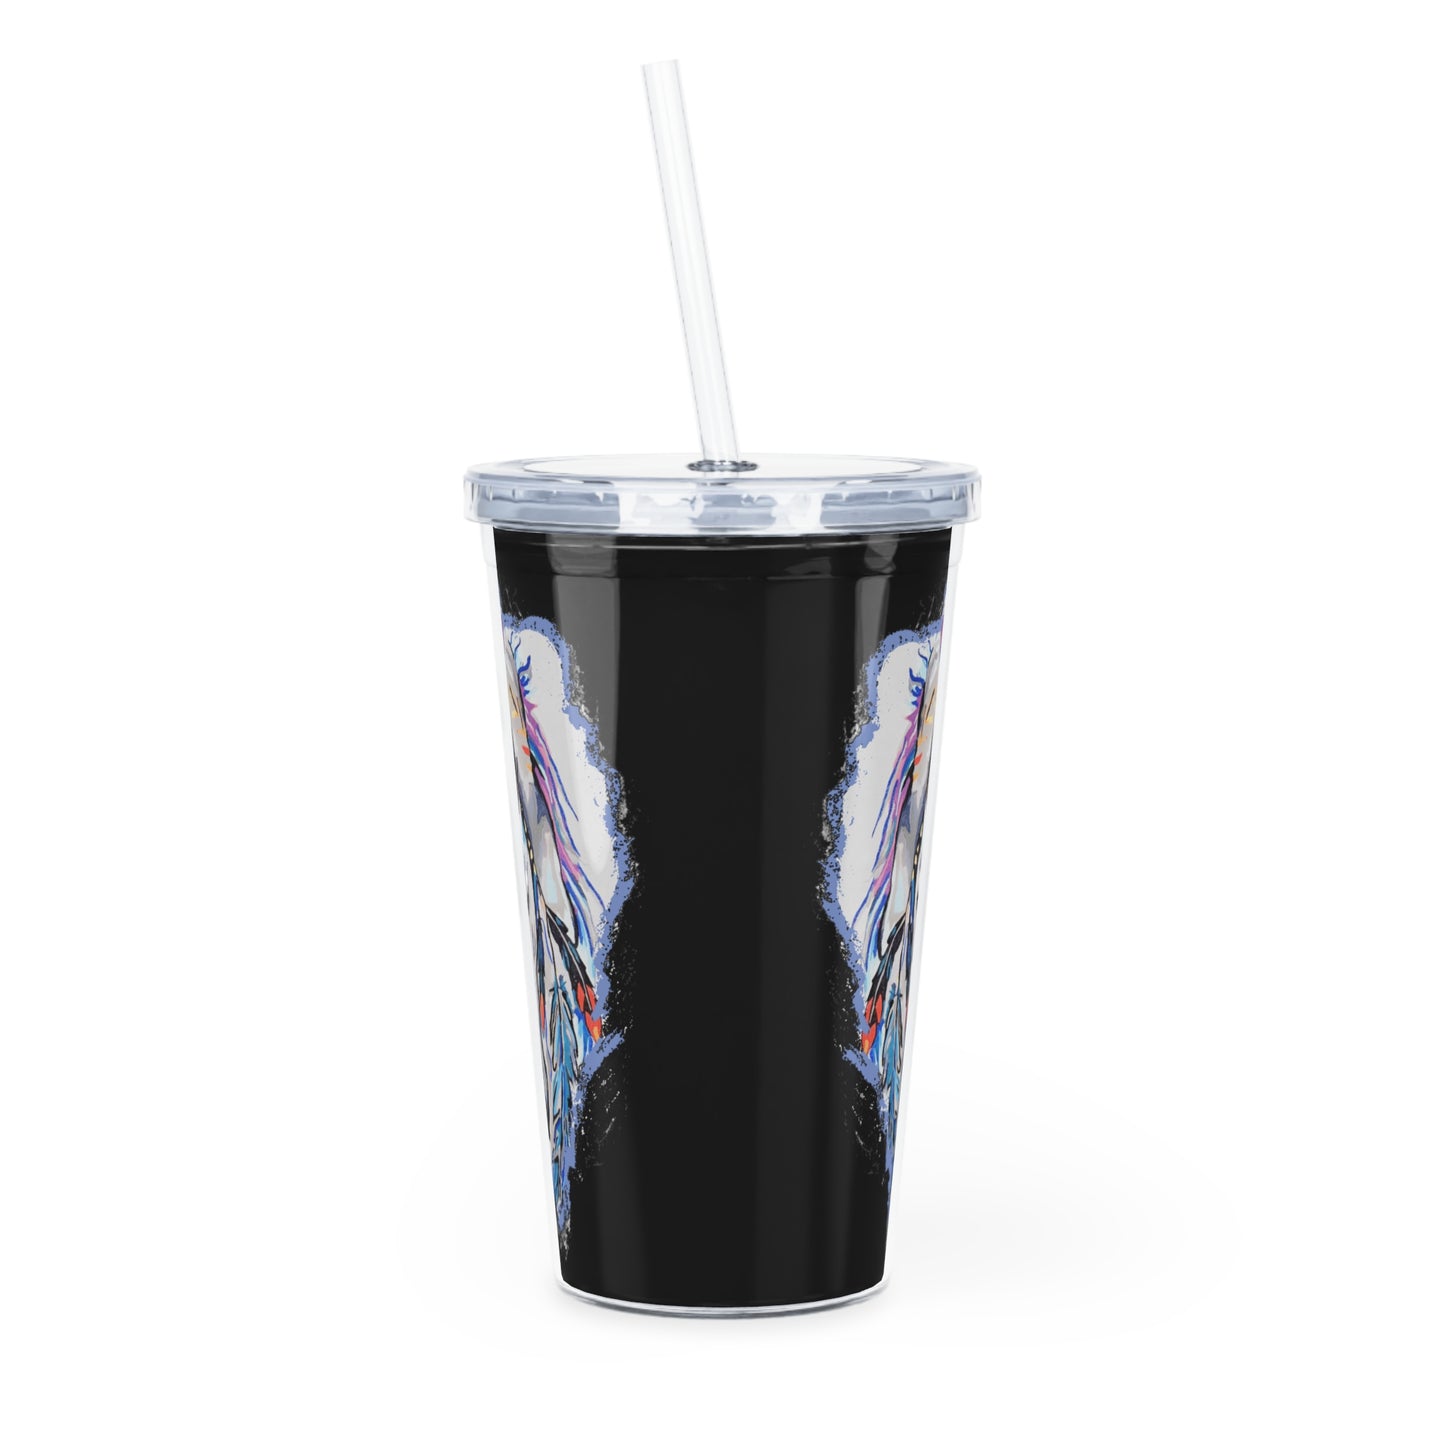 Gypsy Horse Plastic Tumbler with Straw